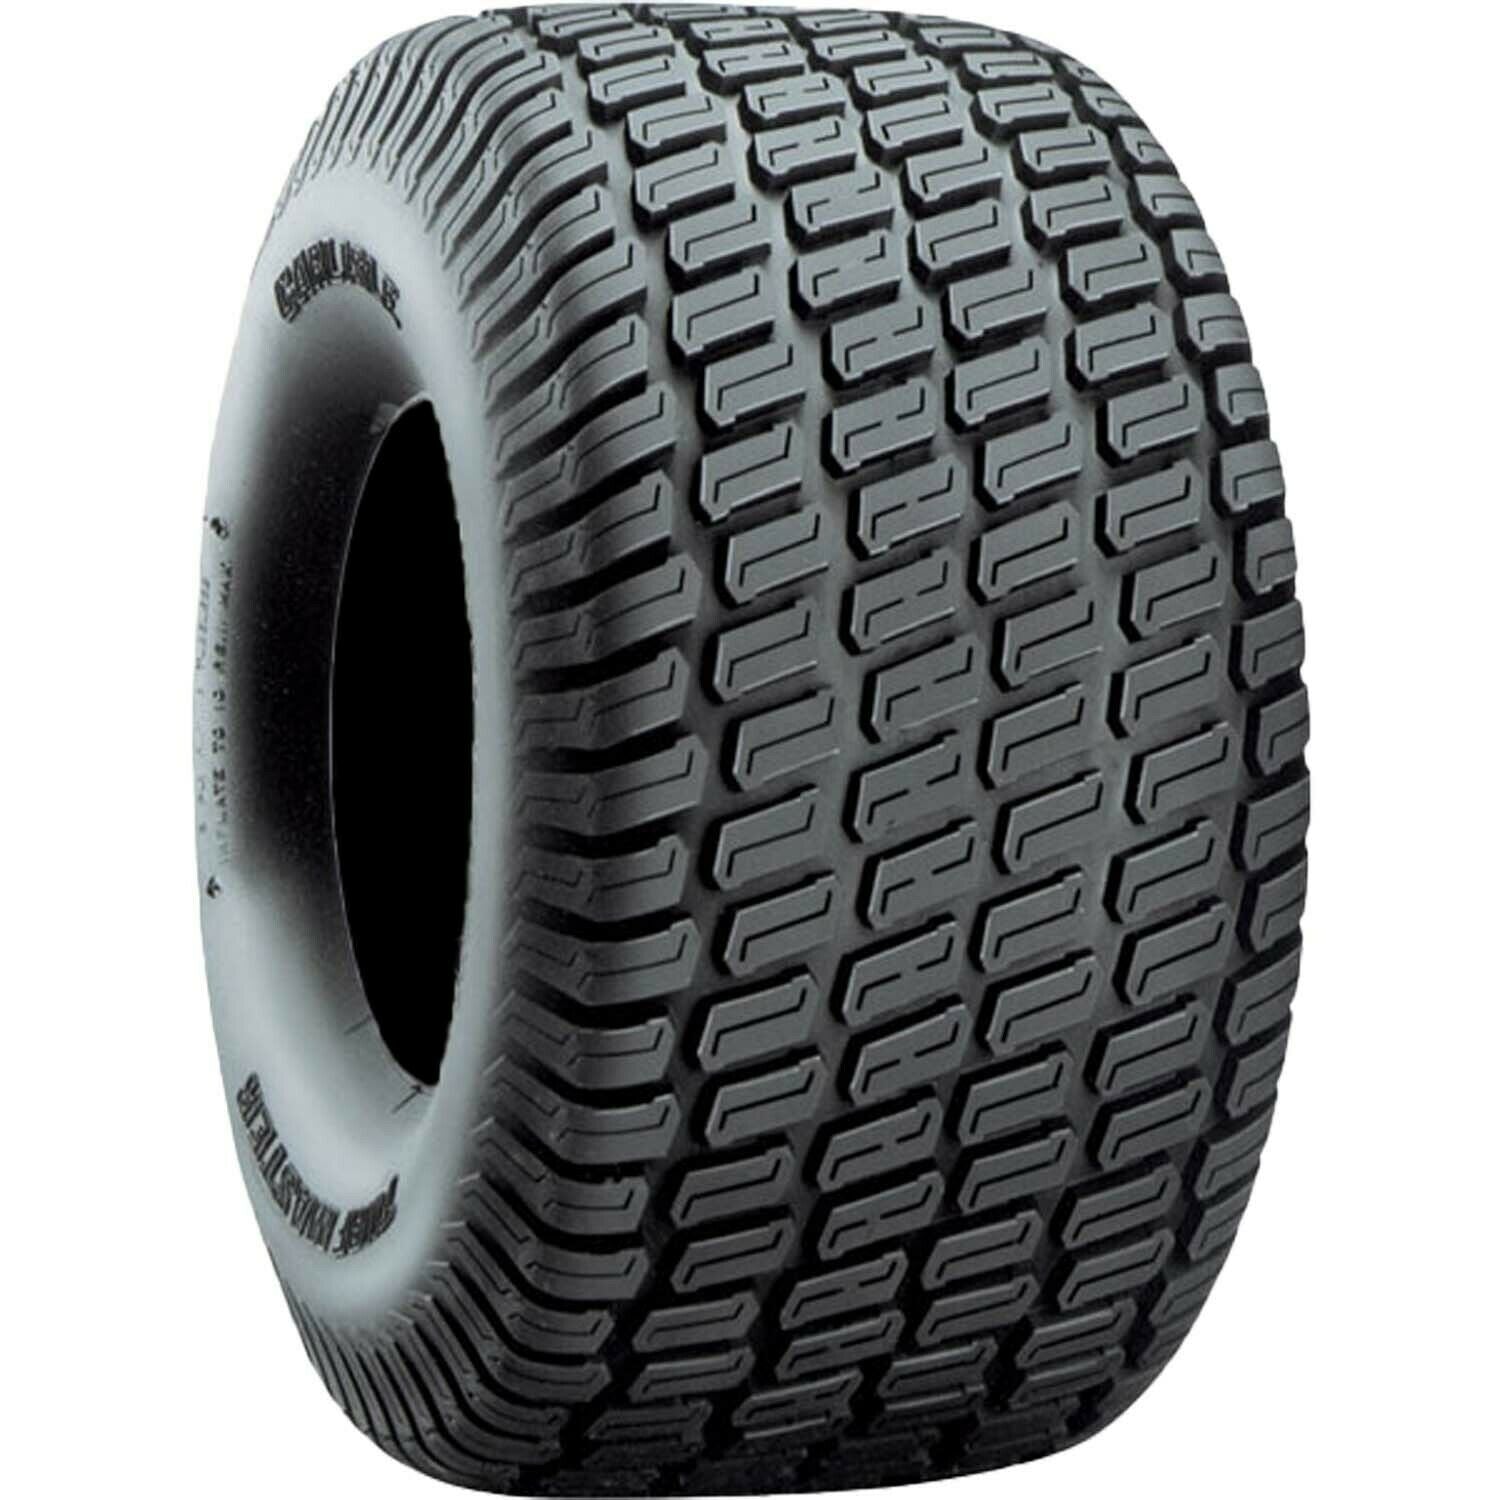 Carlisle Turf Master Lawn and Garden Tire 4Ply 16x7.50-8